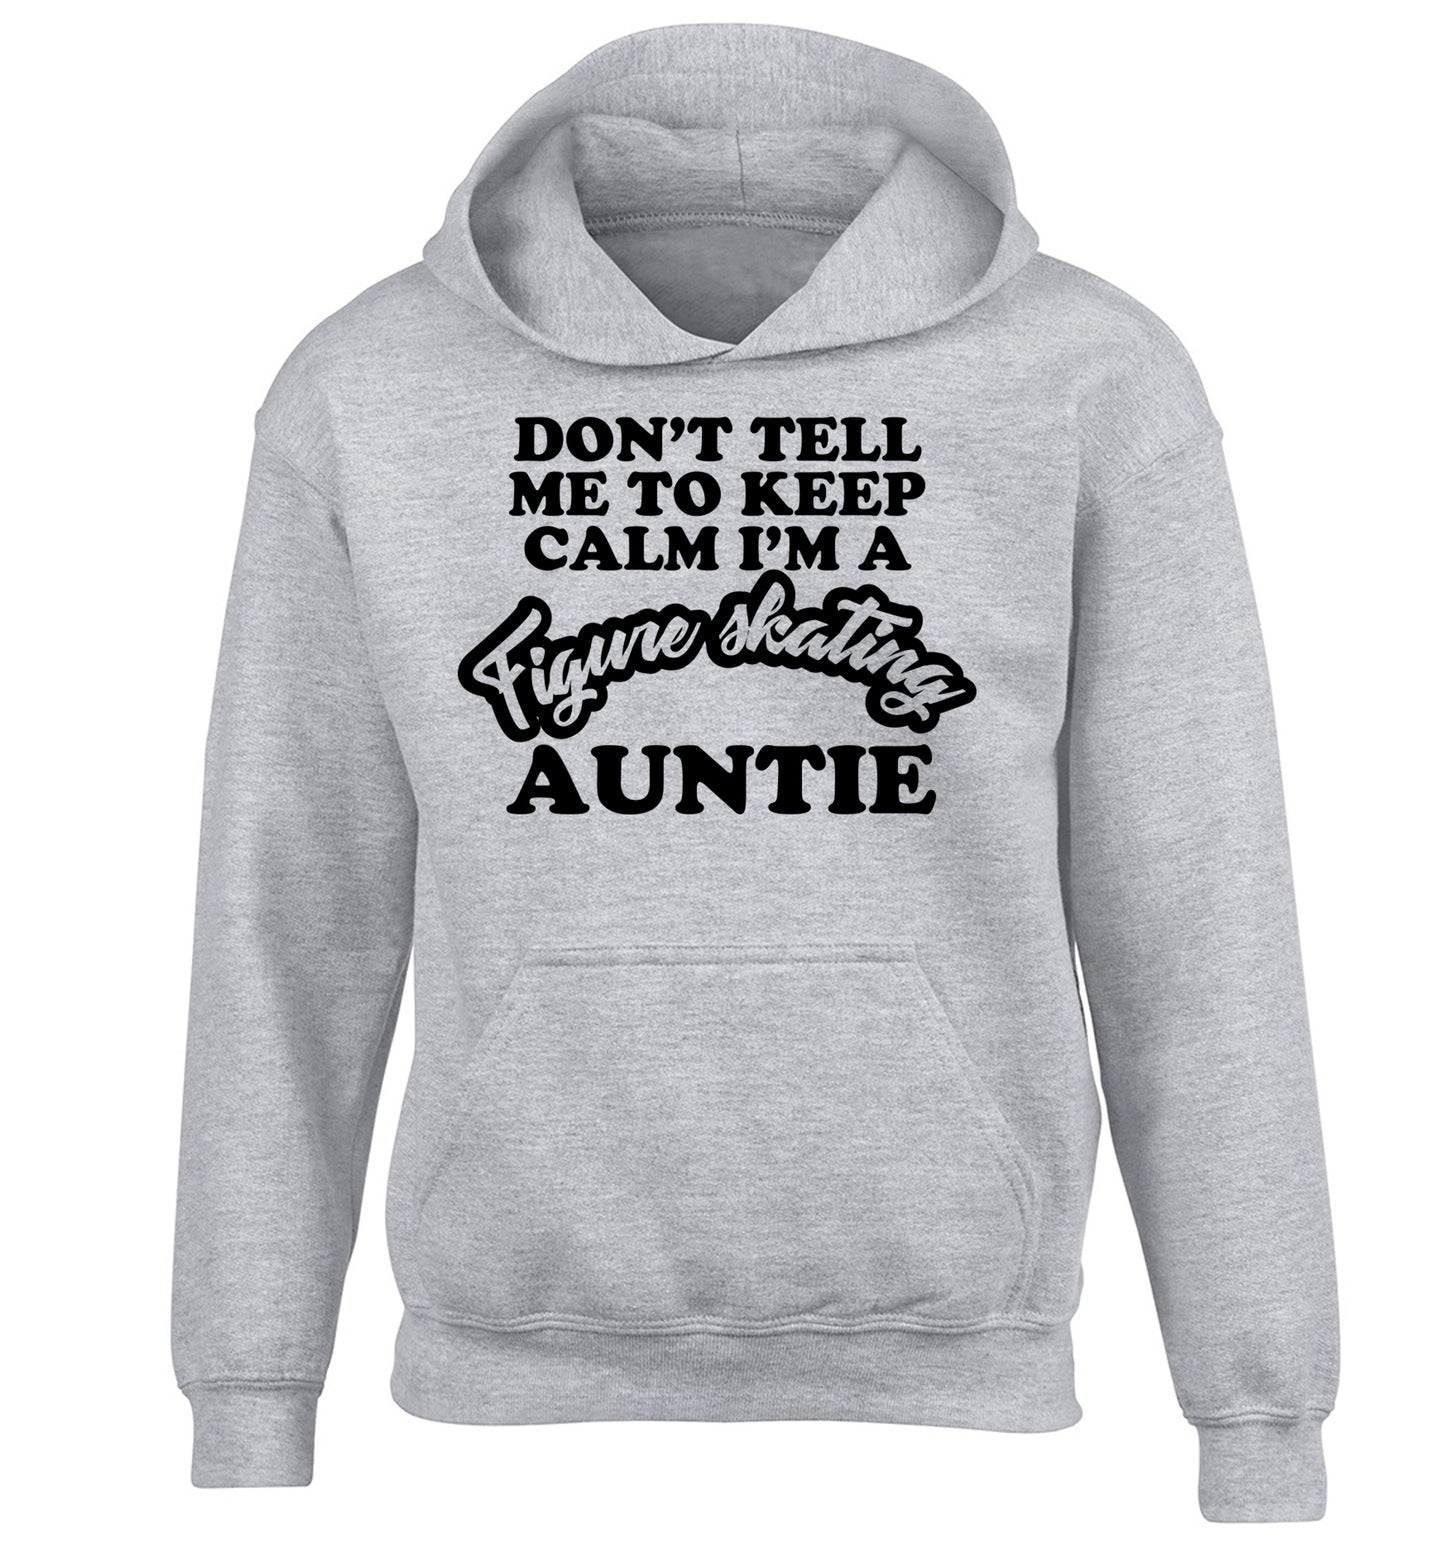 Don't tell me to keep calm I'm a figure skating auntie children's grey hoodie 12-14 Years